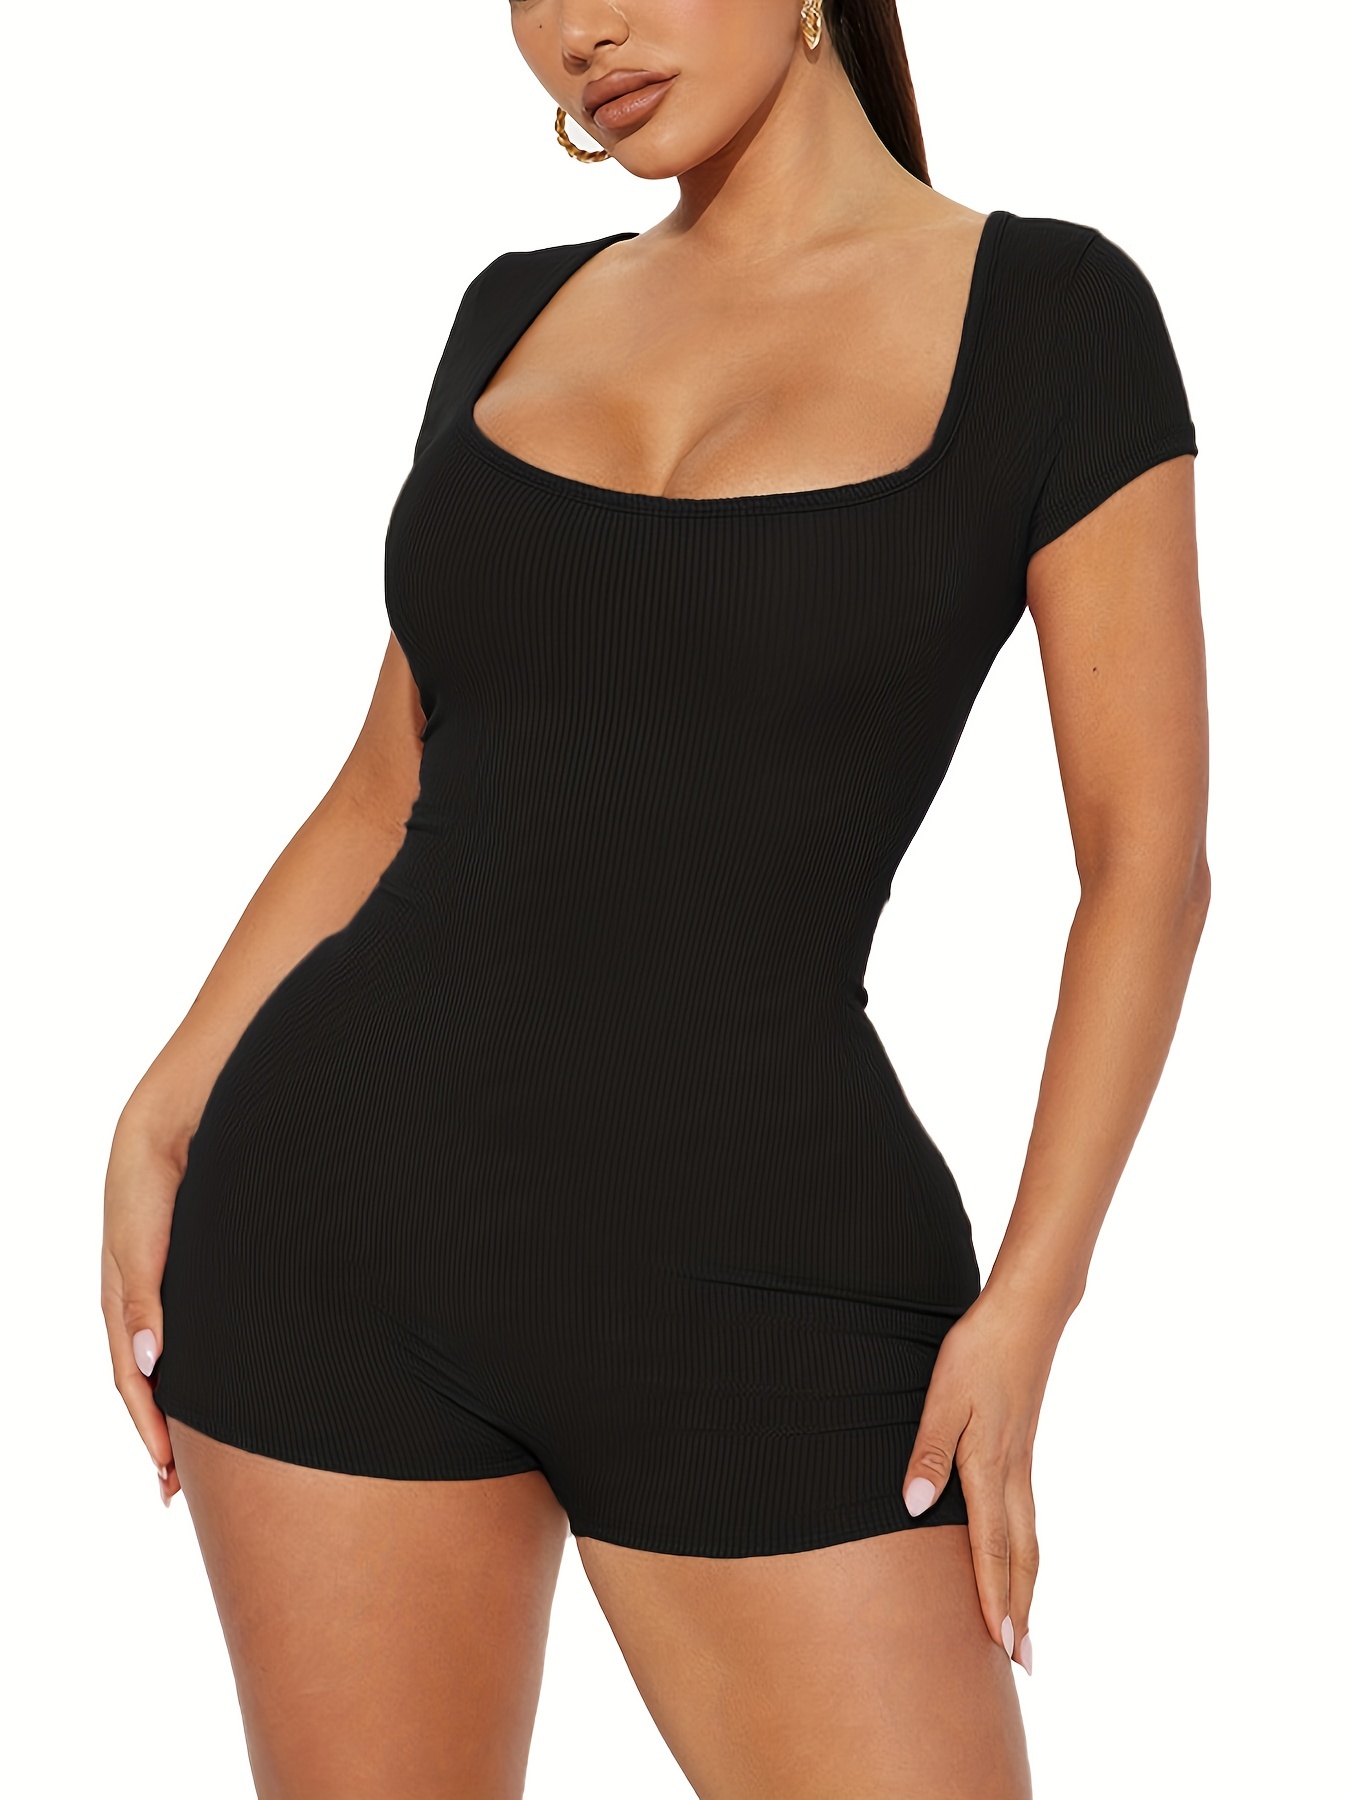 Short Sleeve Jumpsuit for Women Sexy Scoop Neck Stretchy Ribbed Rompers  Shorts One Piece Bodysuit Playsuit Clubwear